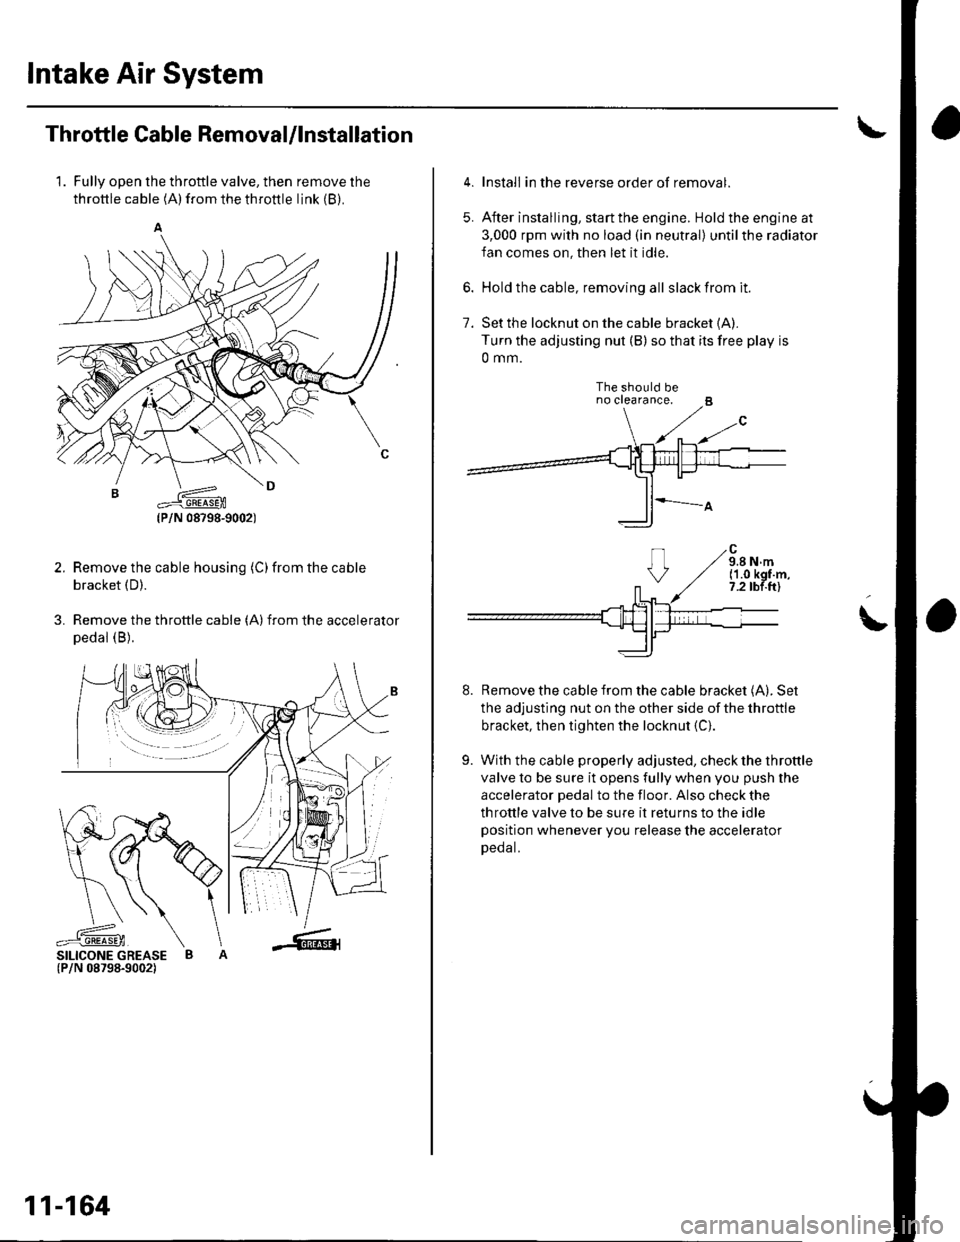 HONDA CIVIC 2003 7.G Owners Guide Intake Air System
Throttle Cable Removal/lnstallation
1. Fully open the throttle valve, then remove the
throttle cable (A) from the throttle link (B).
Remove the cable housing (C)from the cable
bracke